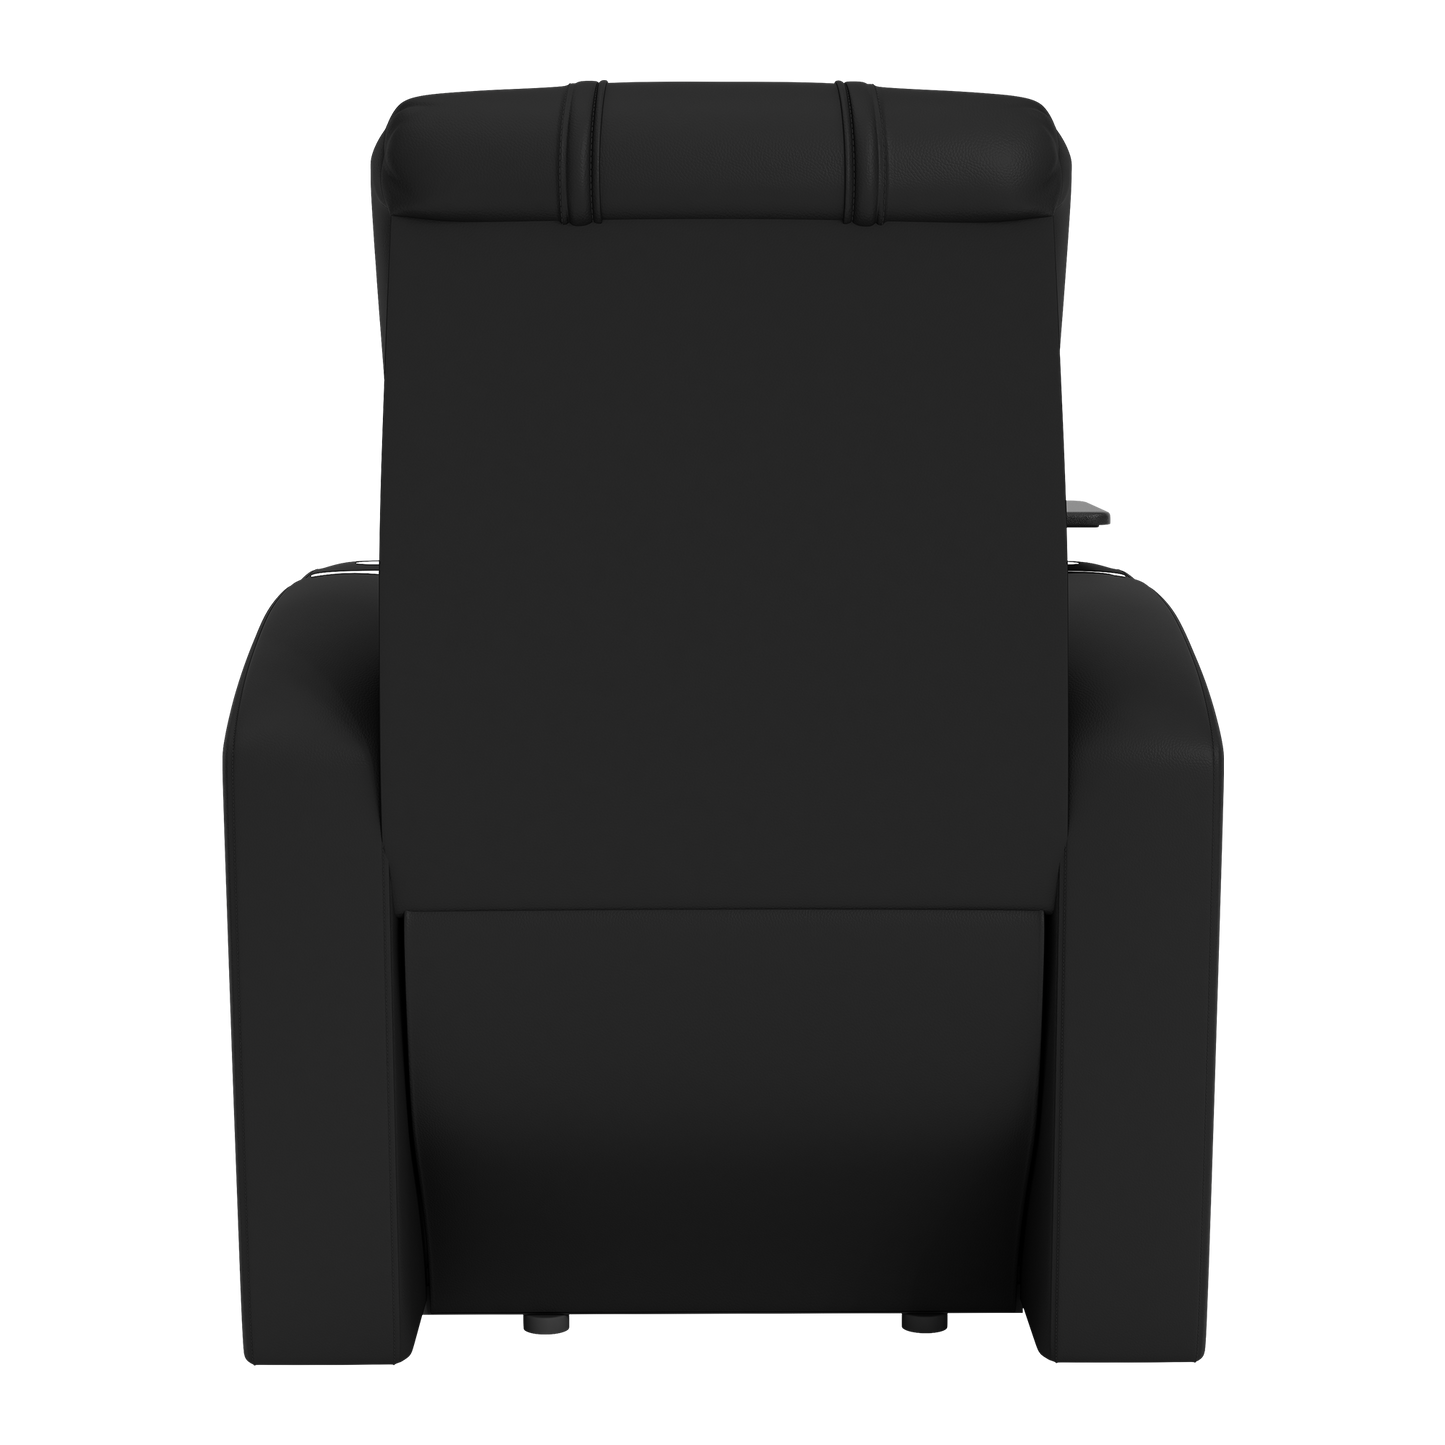 Stealth Power Plus Recliner with Pittsburgh Panthers Alternate Logo